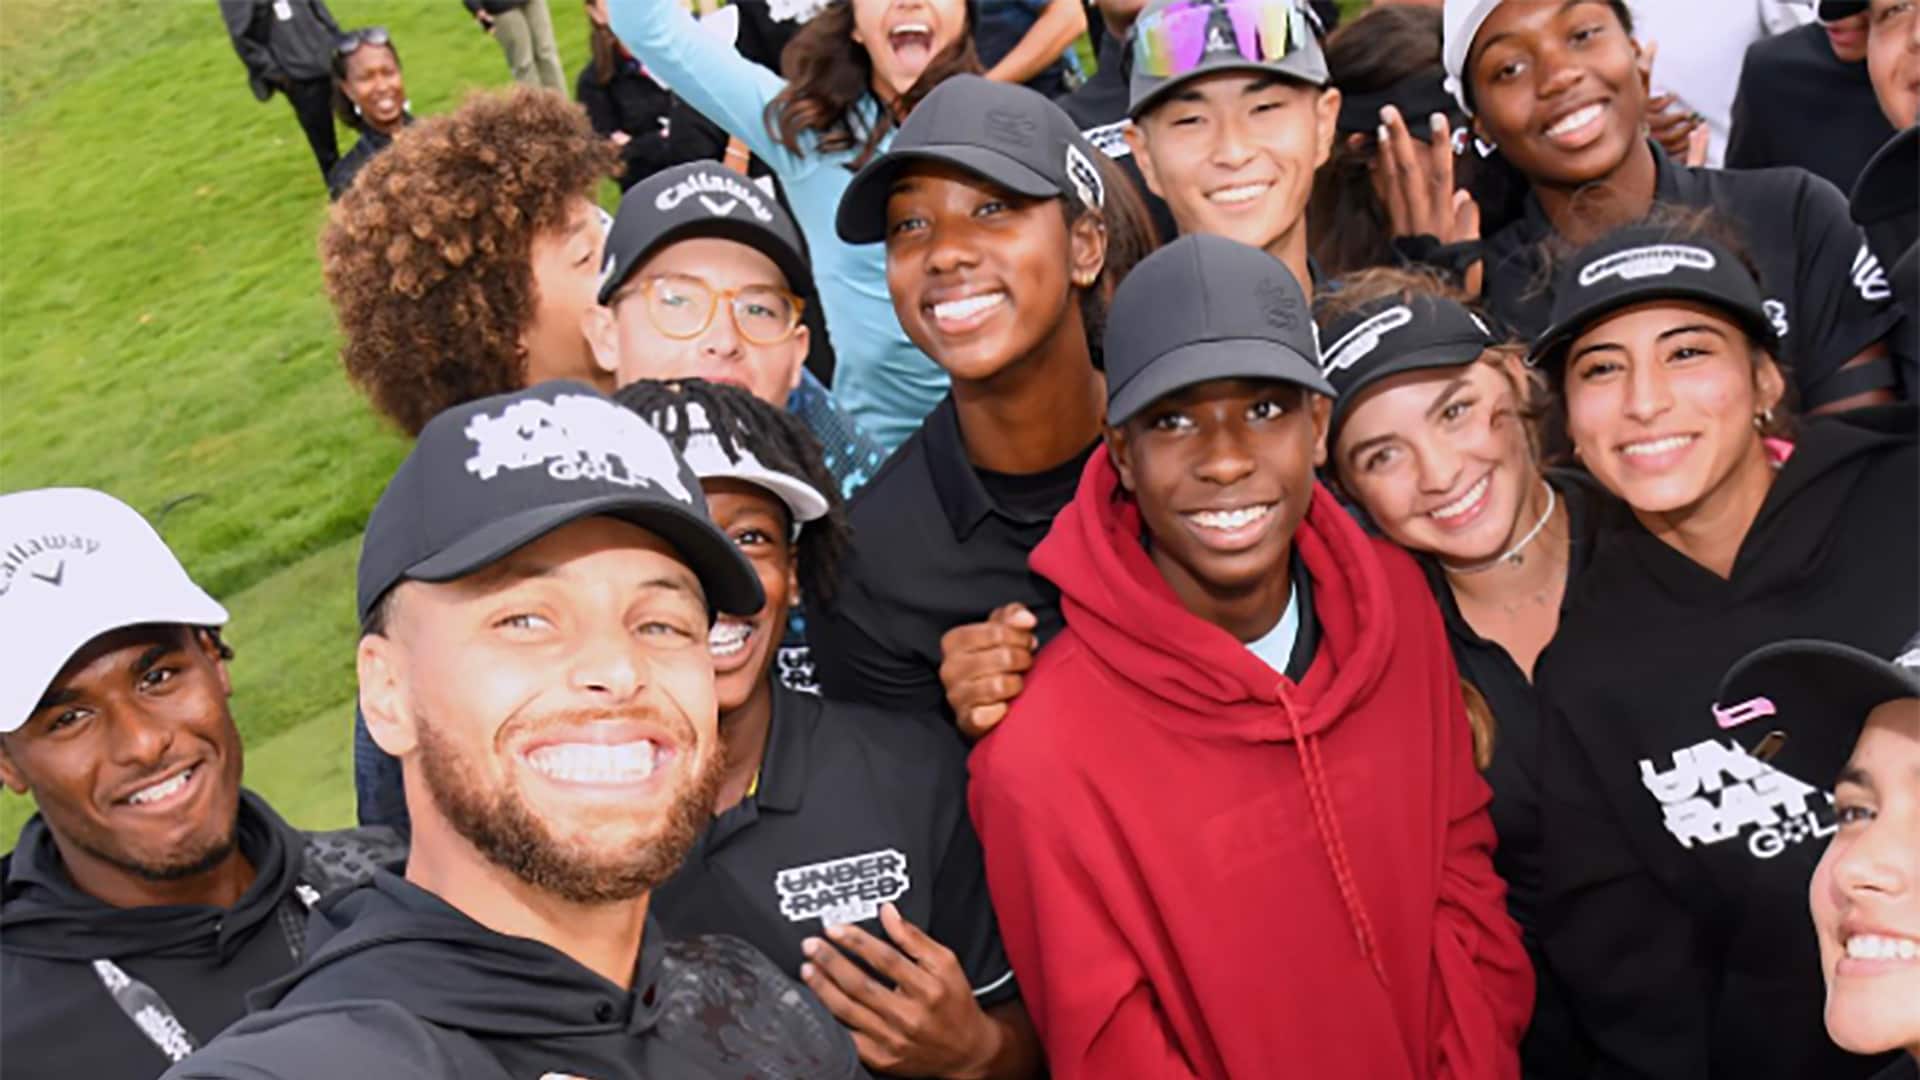 Steph Curry’s Underrated Golf Tour provides culturally diverse juniors opportunities on, off course